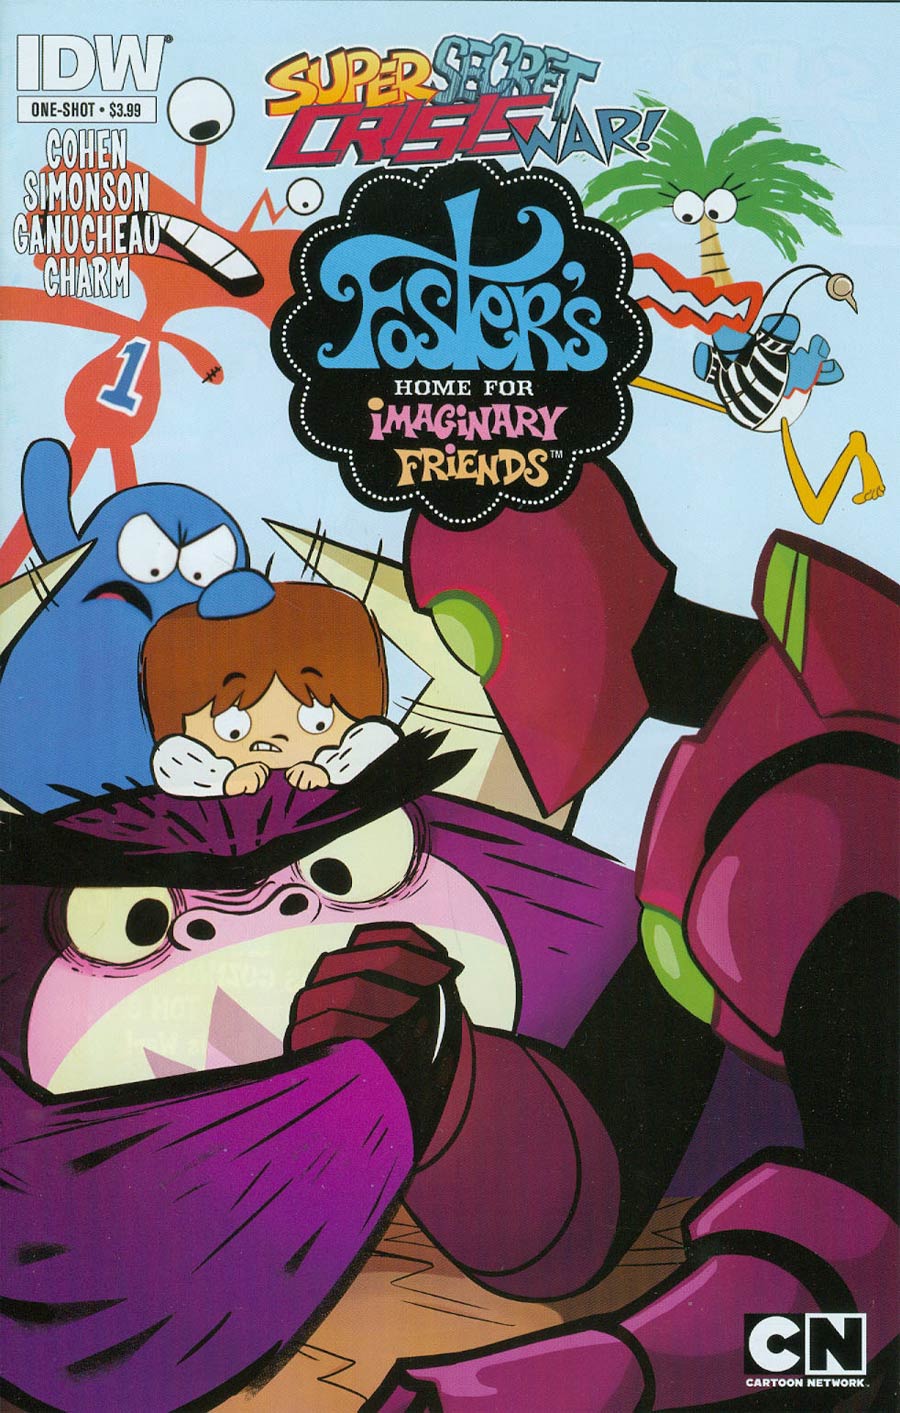 Super Secret Crisis War Fosters Home For Imaginary Friends #1 Cover A Regular Brittney Williams Cover